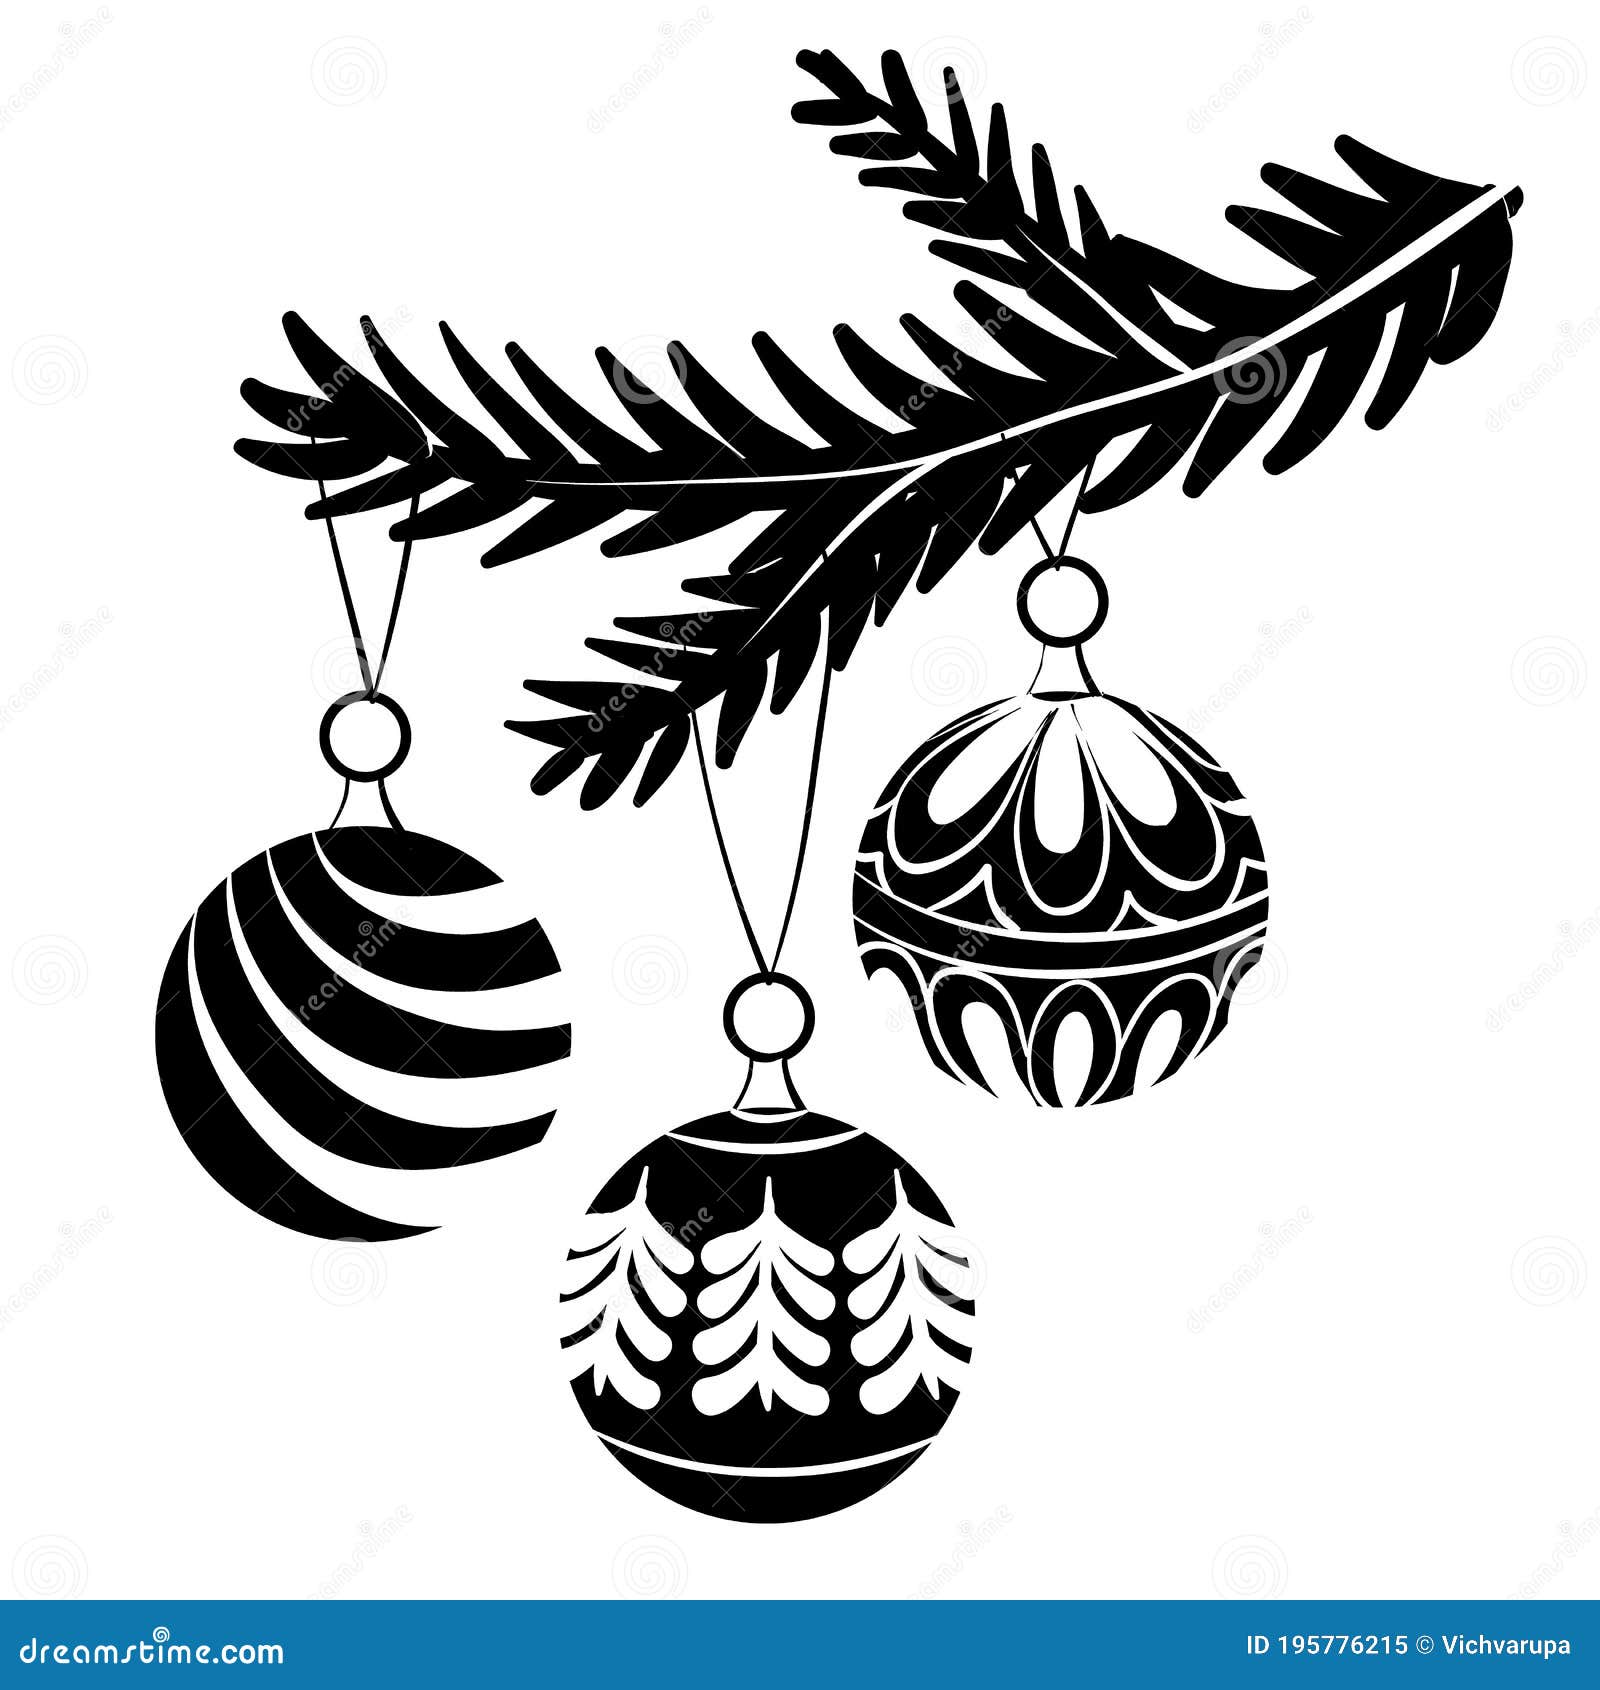 Download Christmas Black White Vector Stock Illustrations 113 161 Christmas Black White Vector Stock Illustrations Vectors Clipart Dreamstime Yellowimages Mockups